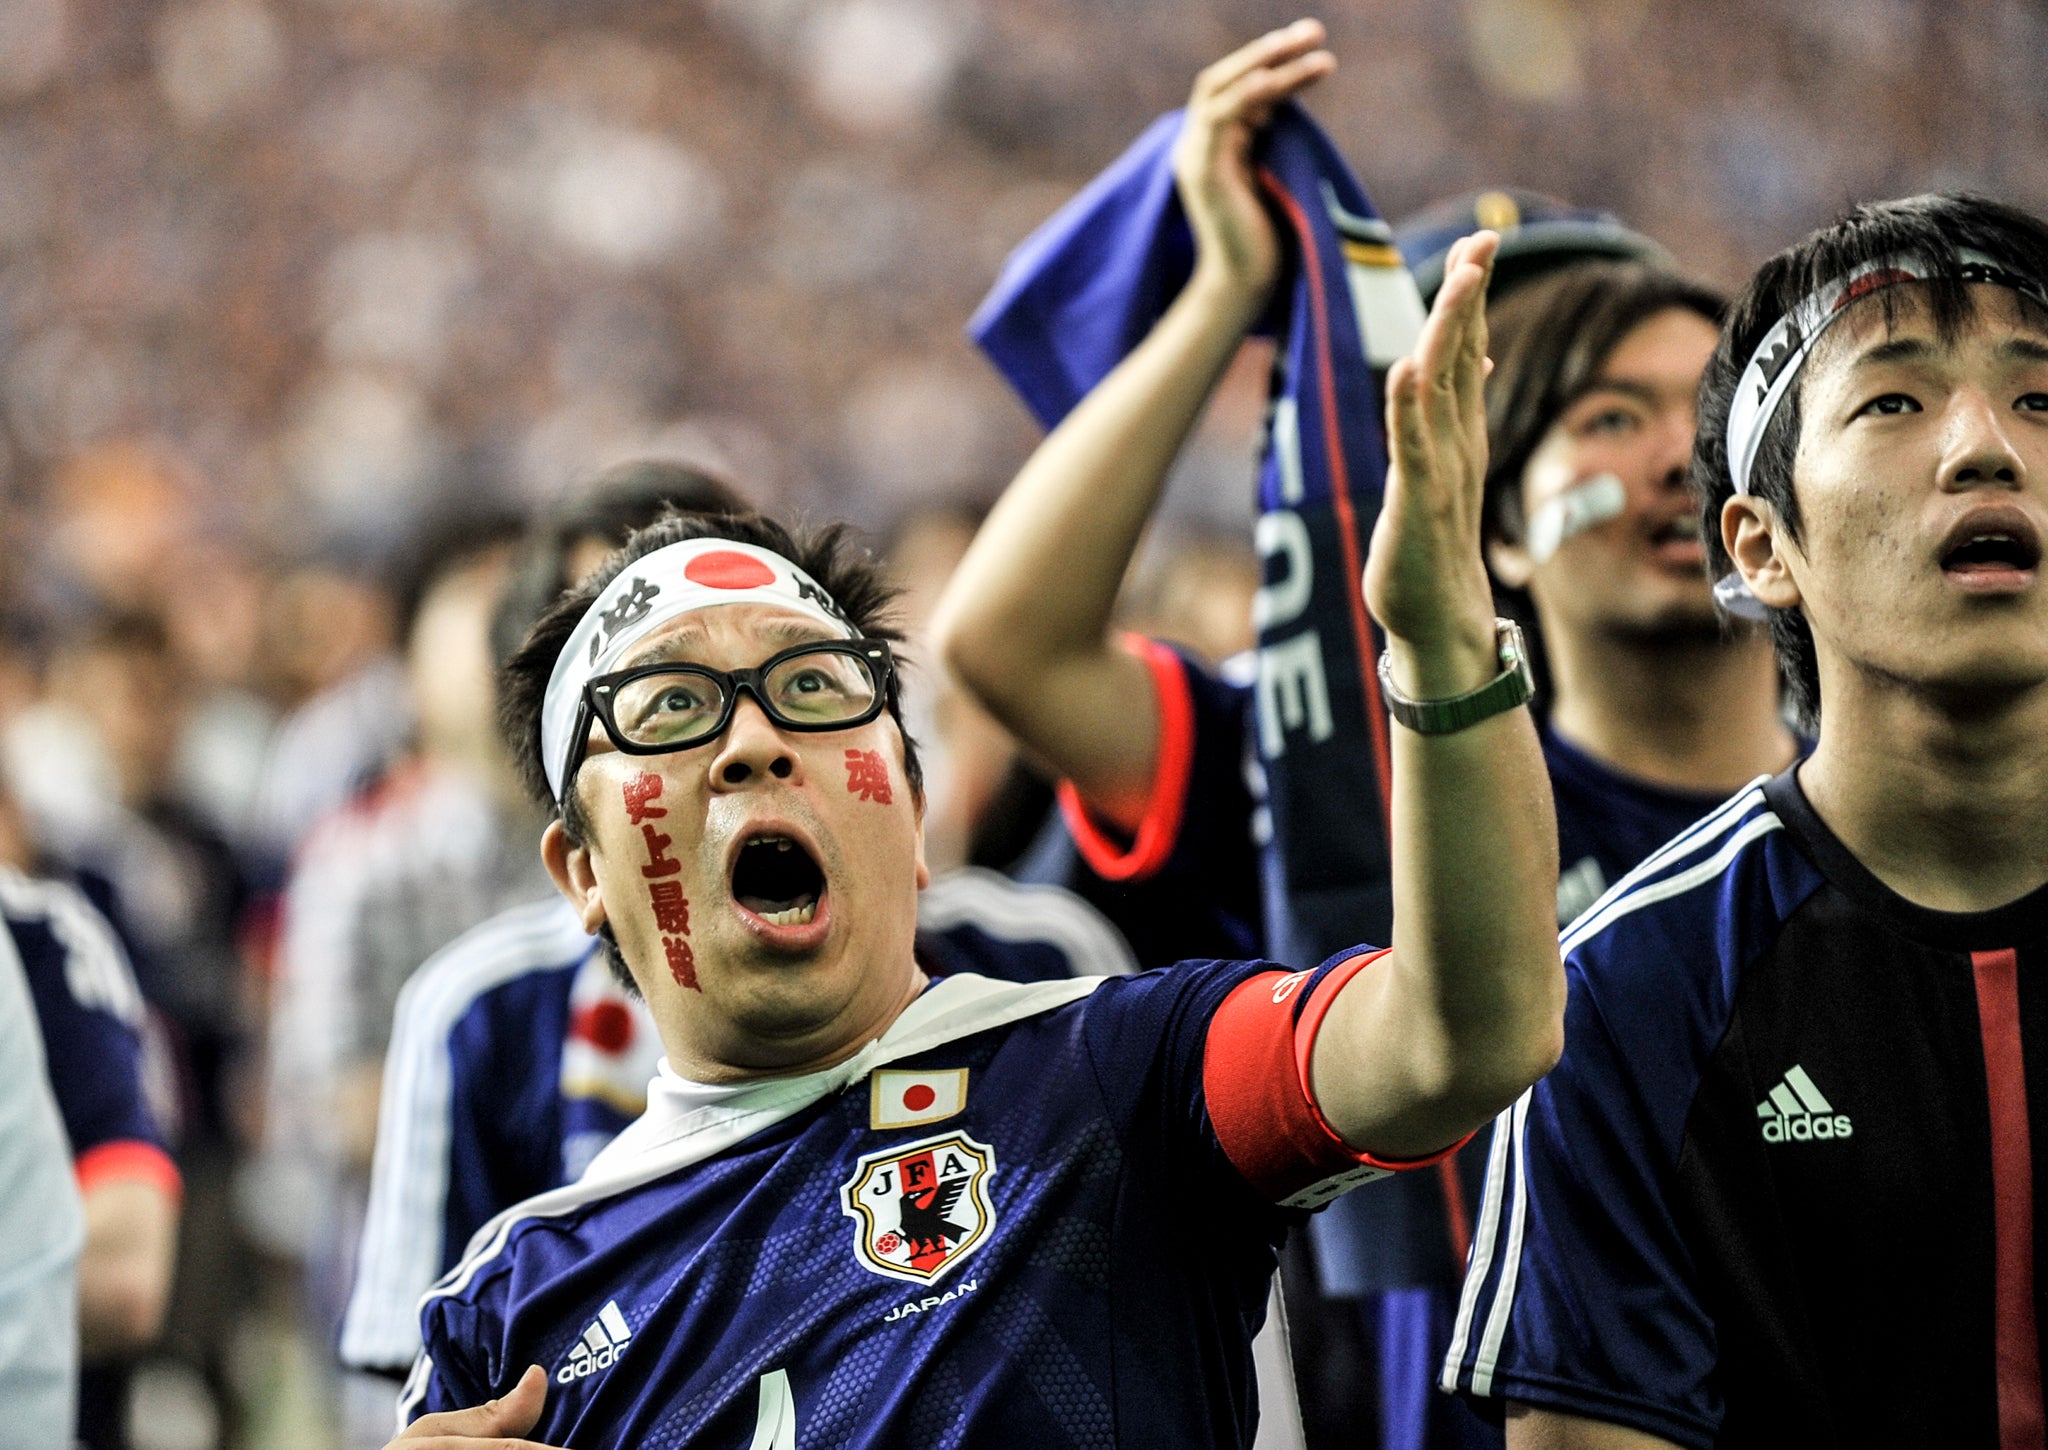 Japanese fans cheer on their team during the 2014 FIFA World Cup match between Japan and Cote d'Ivoire during the public viewing event at Tokyo Dome on June 15